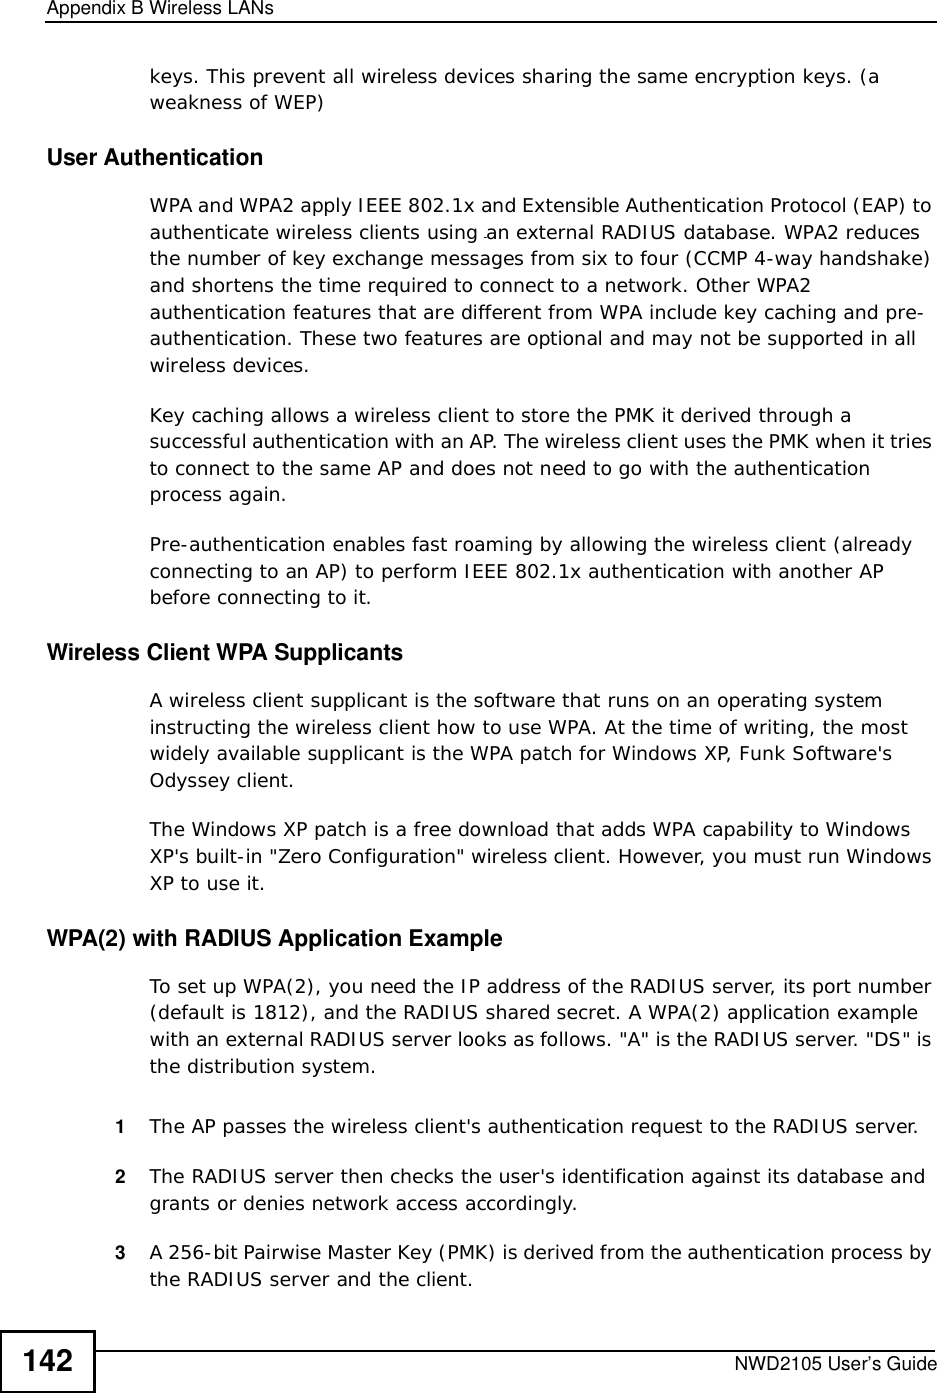 Appendix BWireless LANsNWD2105 User’s Guide142keys. This prevent all wireless devices sharing the same encryption keys. (a weakness of WEP)User Authentication WPA and WPA2 apply IEEE 802.1x and Extensible Authentication Protocol (EAP) to authenticate wireless clients using an external RADIUS database. WPA2 reduces the number of key exchange messages from six to four (CCMP 4-way handshake) and shortens the time required to connect to a network. Other WPA2 authentication features that are different from WPA include key caching and pre-authentication. These two features are optional and may not be supported in all wireless devices.Key caching allows a wireless client to store the PMK it derived through a successful authentication with an AP. The wireless client uses the PMK when it tries to connect to the same AP and does not need to go with the authentication process again.Pre-authentication enables fast roaming by allowing the wireless client (already connecting to an AP) to perform IEEE 802.1x authentication with another AP before connecting to it.Wireless Client WPA SupplicantsA wireless client supplicant is the software that runs on an operating system instructing the wireless client how to use WPA. At the time of writing, the most widely available supplicant is theWPA patch for Windows XP, Funk Software&apos;s Odyssey client. The Windows XP patch is a free download that adds WPA capability to Windows XP&apos;s built-in &quot;Zero Configuration&quot; wireless client. However, you must run Windows XP to use it. WPA(2) with RADIUS Application ExampleTo set up WPA(2), you need the IP address of the RADIUS server, its port number (default is 1812), and the RADIUS shared secret. A WPA(2) application example with an external RADIUS server looks as follows. &quot;A&quot; is the RADIUS server. &quot;DS&quot; is the distribution system.1The AP passes the wireless client&apos;s authentication request to the RADIUS server.2The RADIUS server then checks the user&apos;s identification against its database and grants or denies network access accordingly.3A 256-bit Pairwise Master Key (PMK) is derived from the authentication process by the RADIUS server and the client.